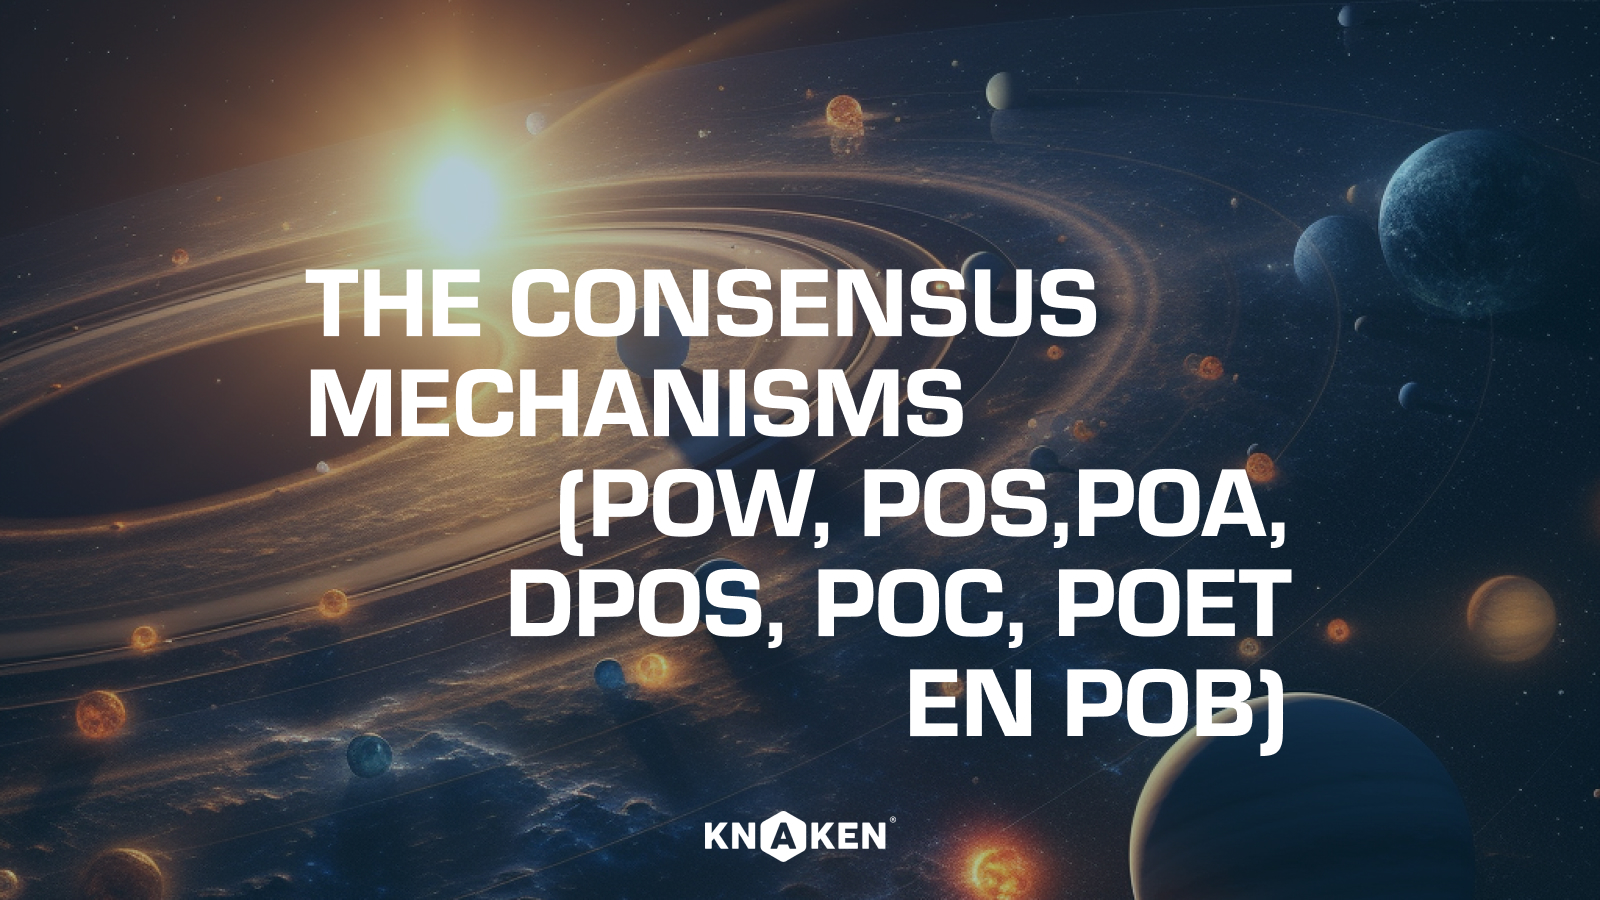 Consensus Mechanisms: What Are They and What Are the Pros and Cons for Each Different Method?